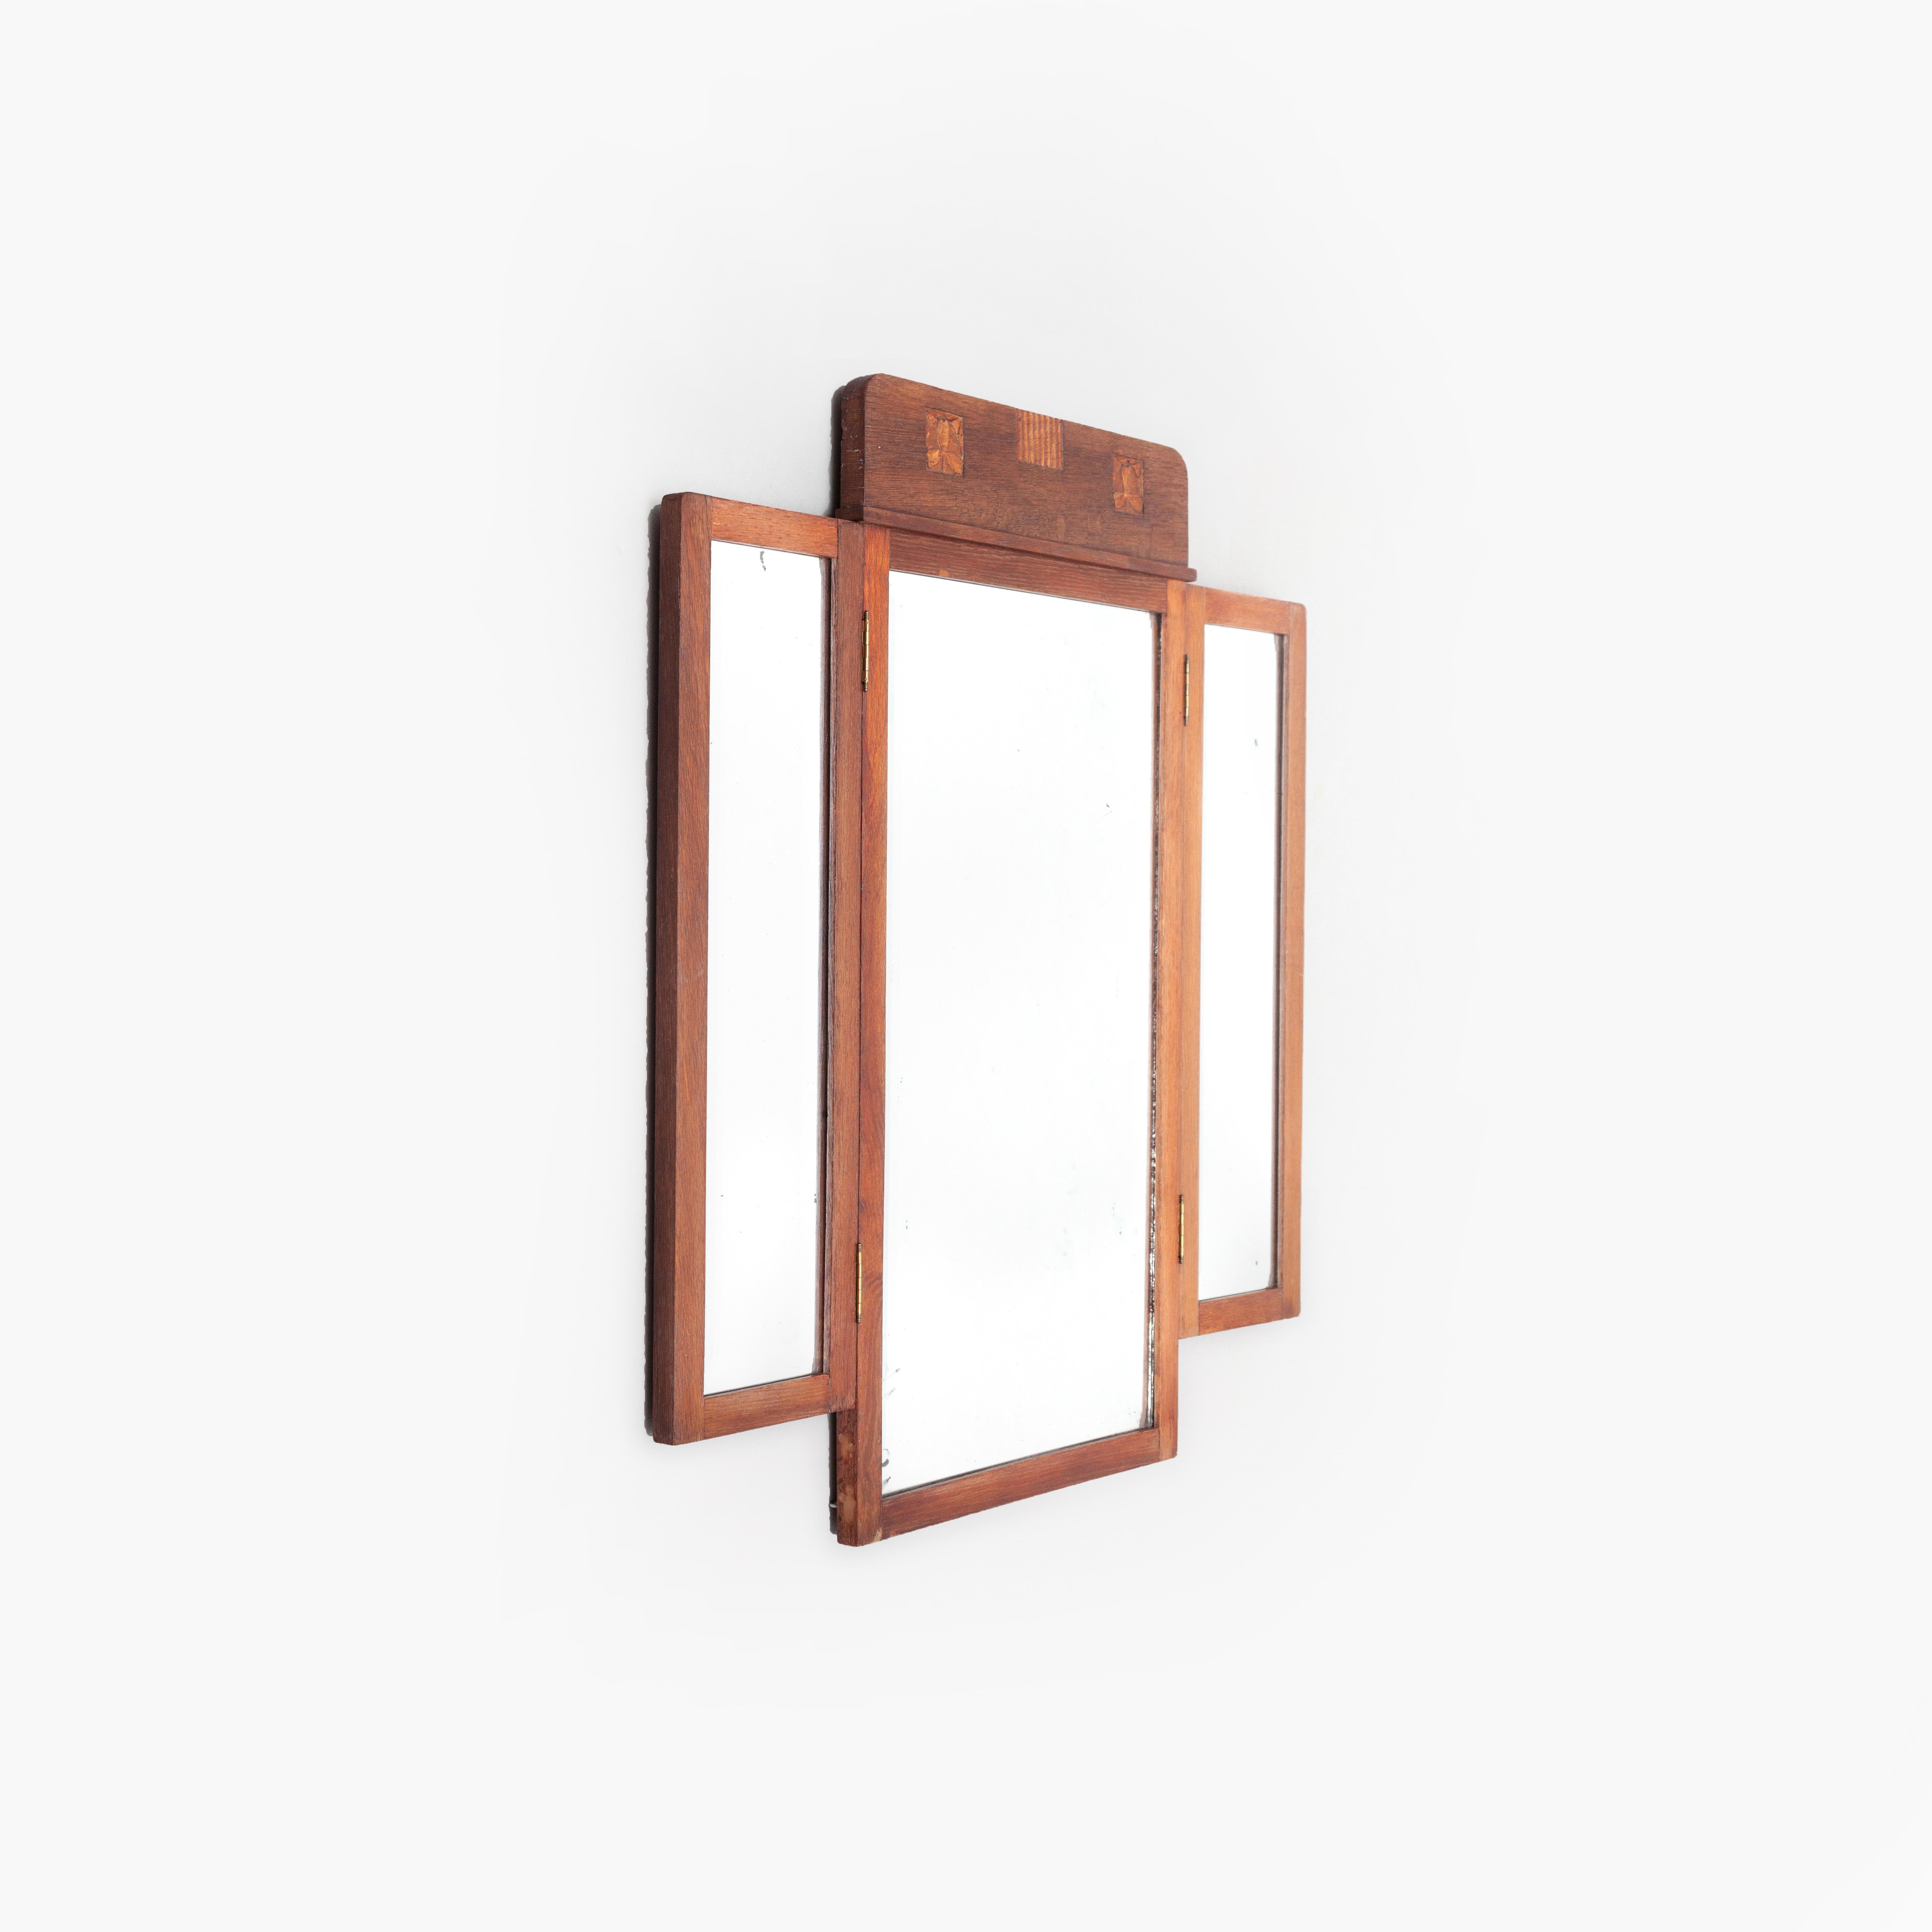 Handcrafted Art-Deco mirror made in Spain, circa 1920
Oak wood.

In original condition, with minor wear consistent of age and use, preserving a beautiful patina.